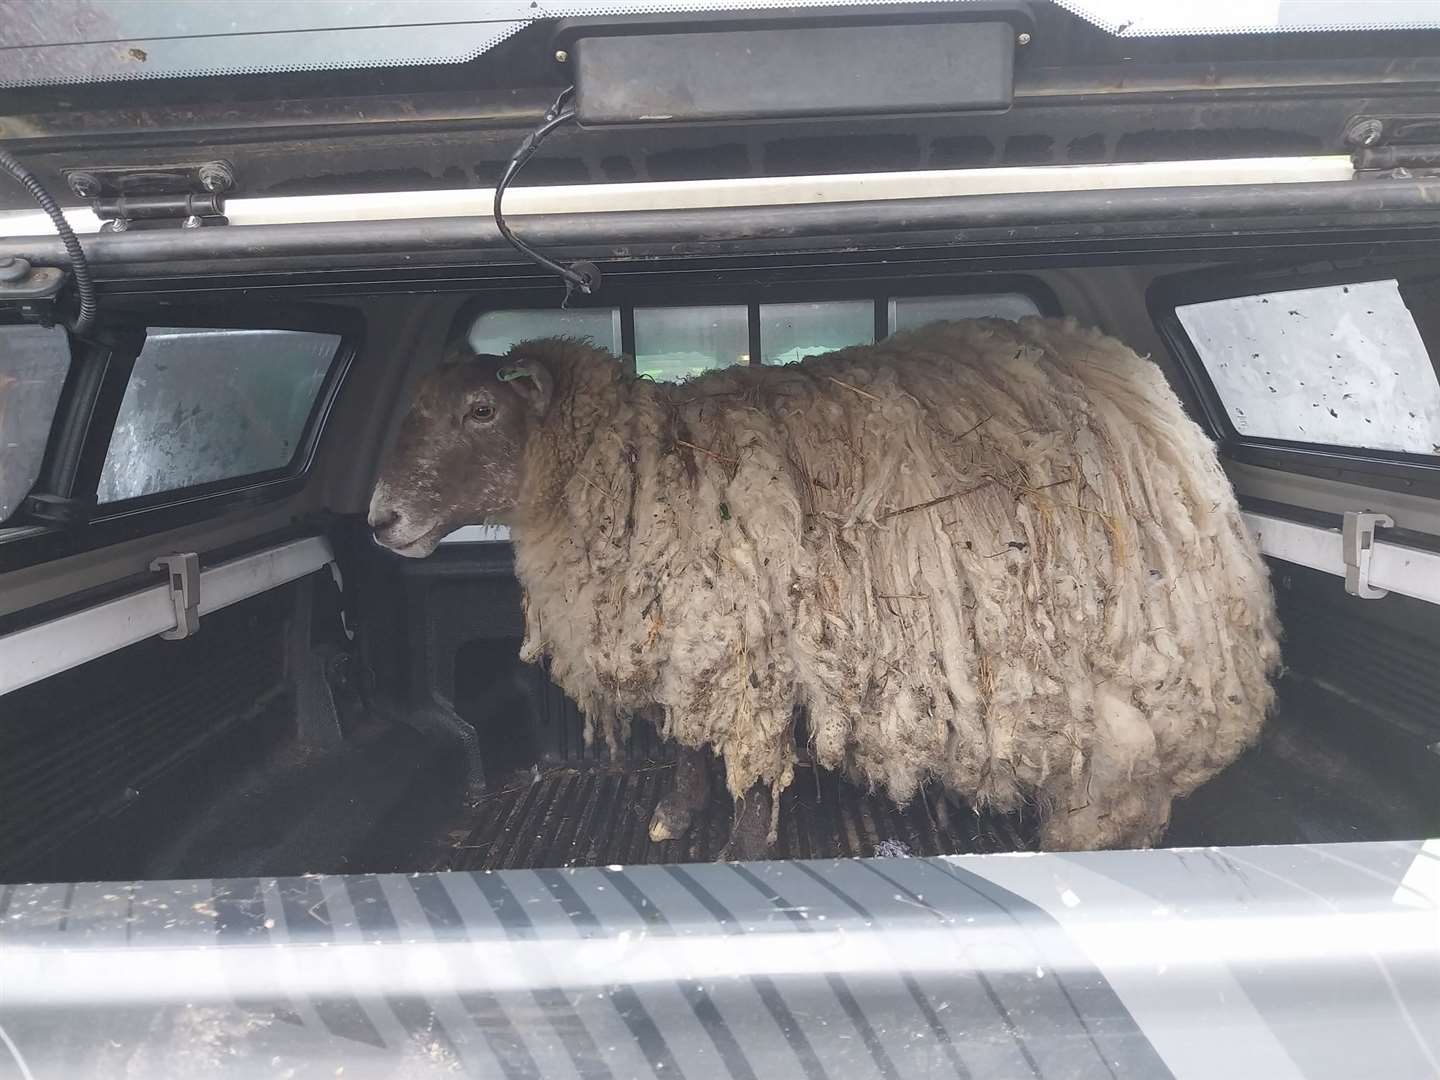 The sheep, named Fiona, is said to be in good condition.